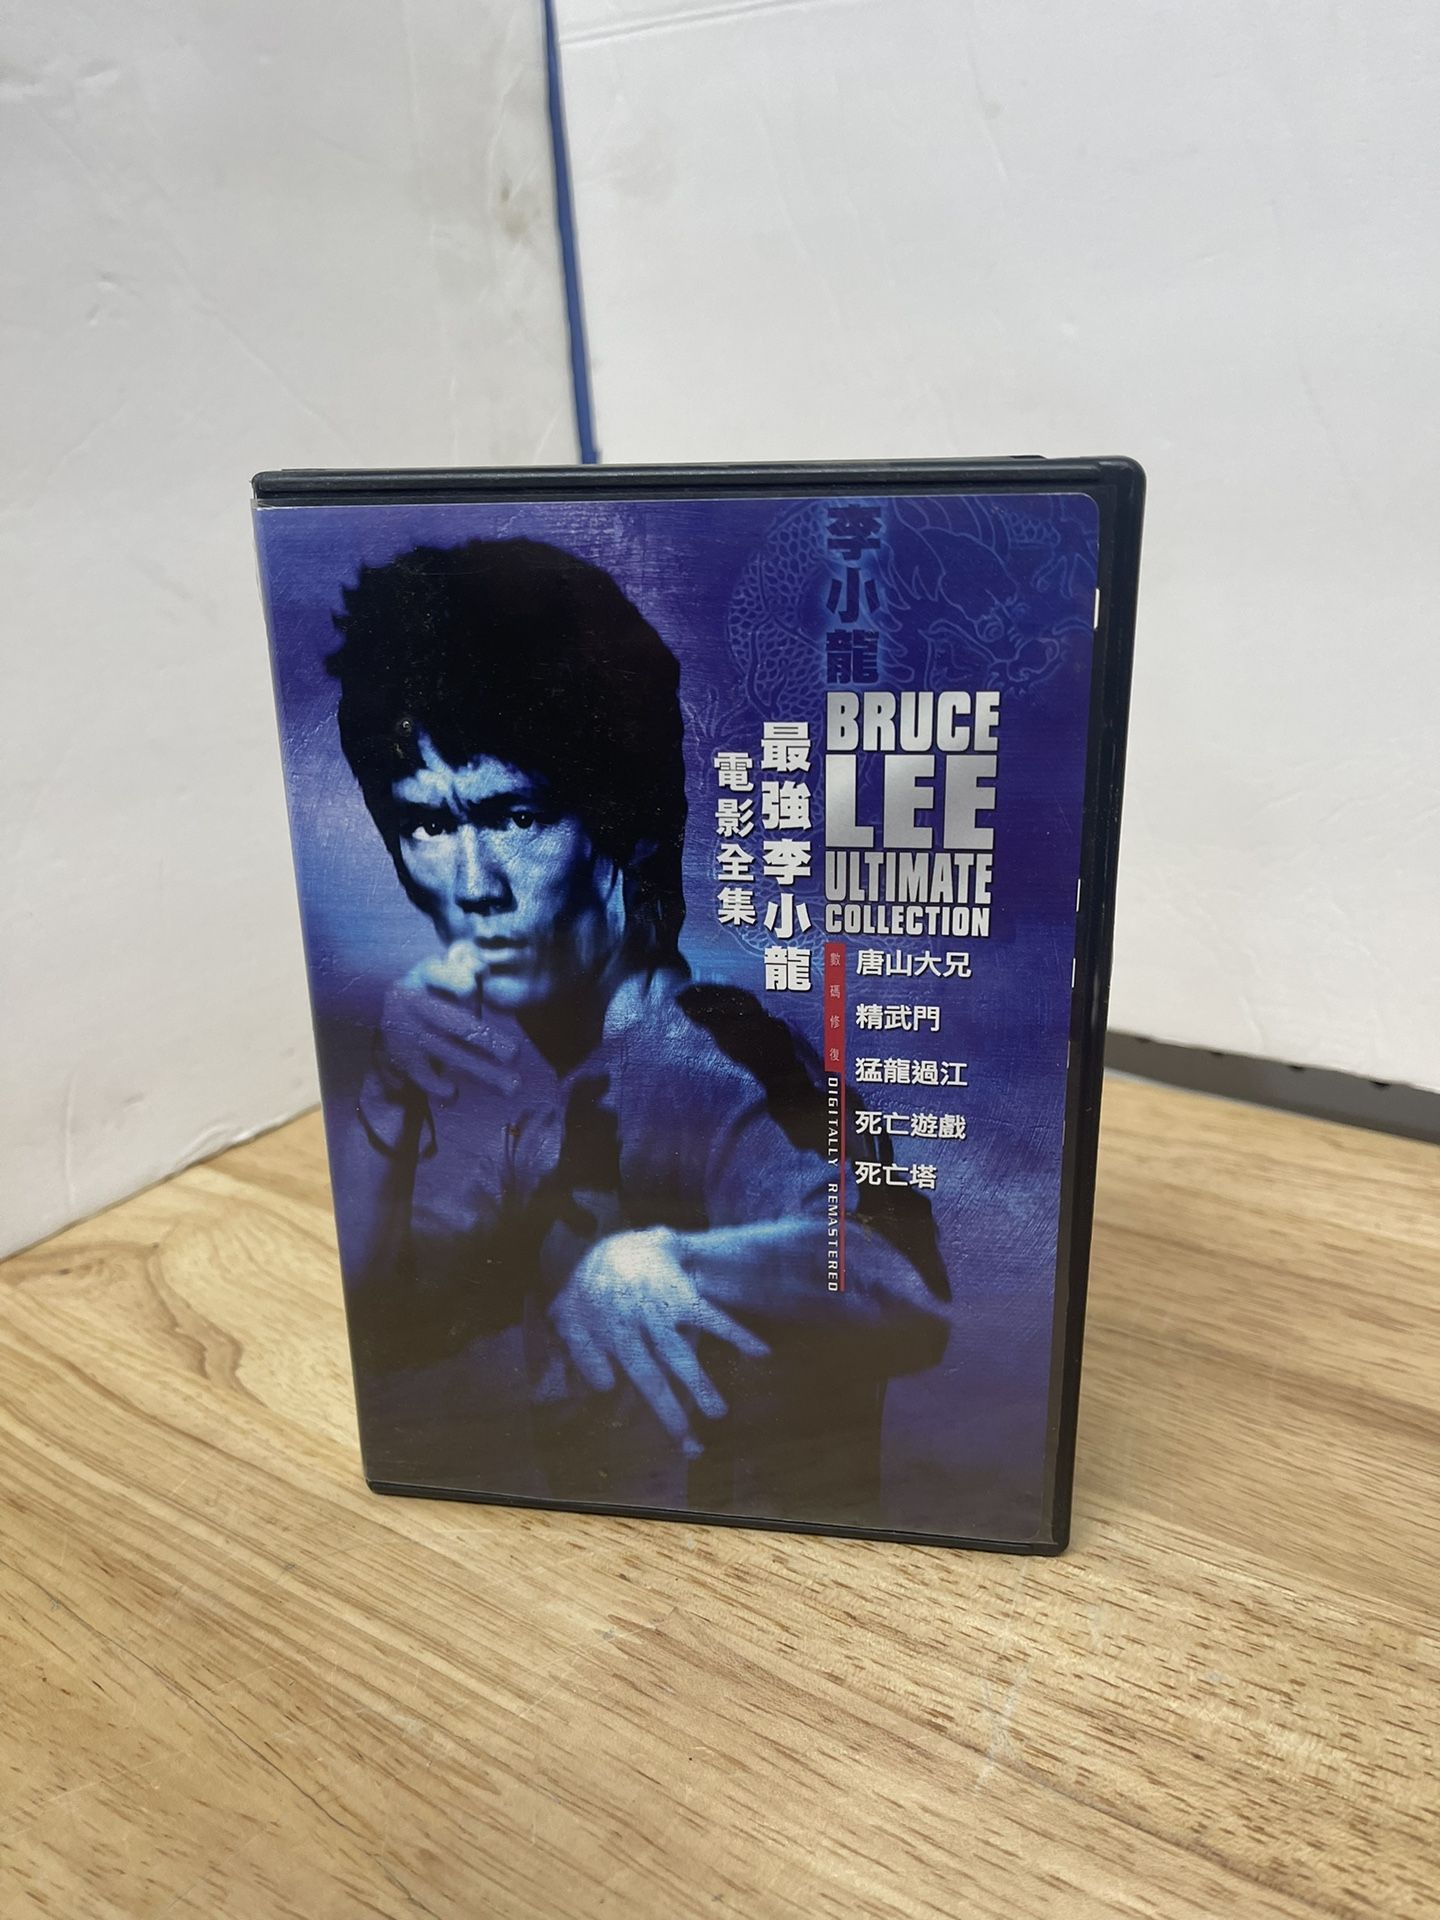 Bruce Lee Ultimate Collection The Big Boss Fist of Fury Way of the Dragon Dvds